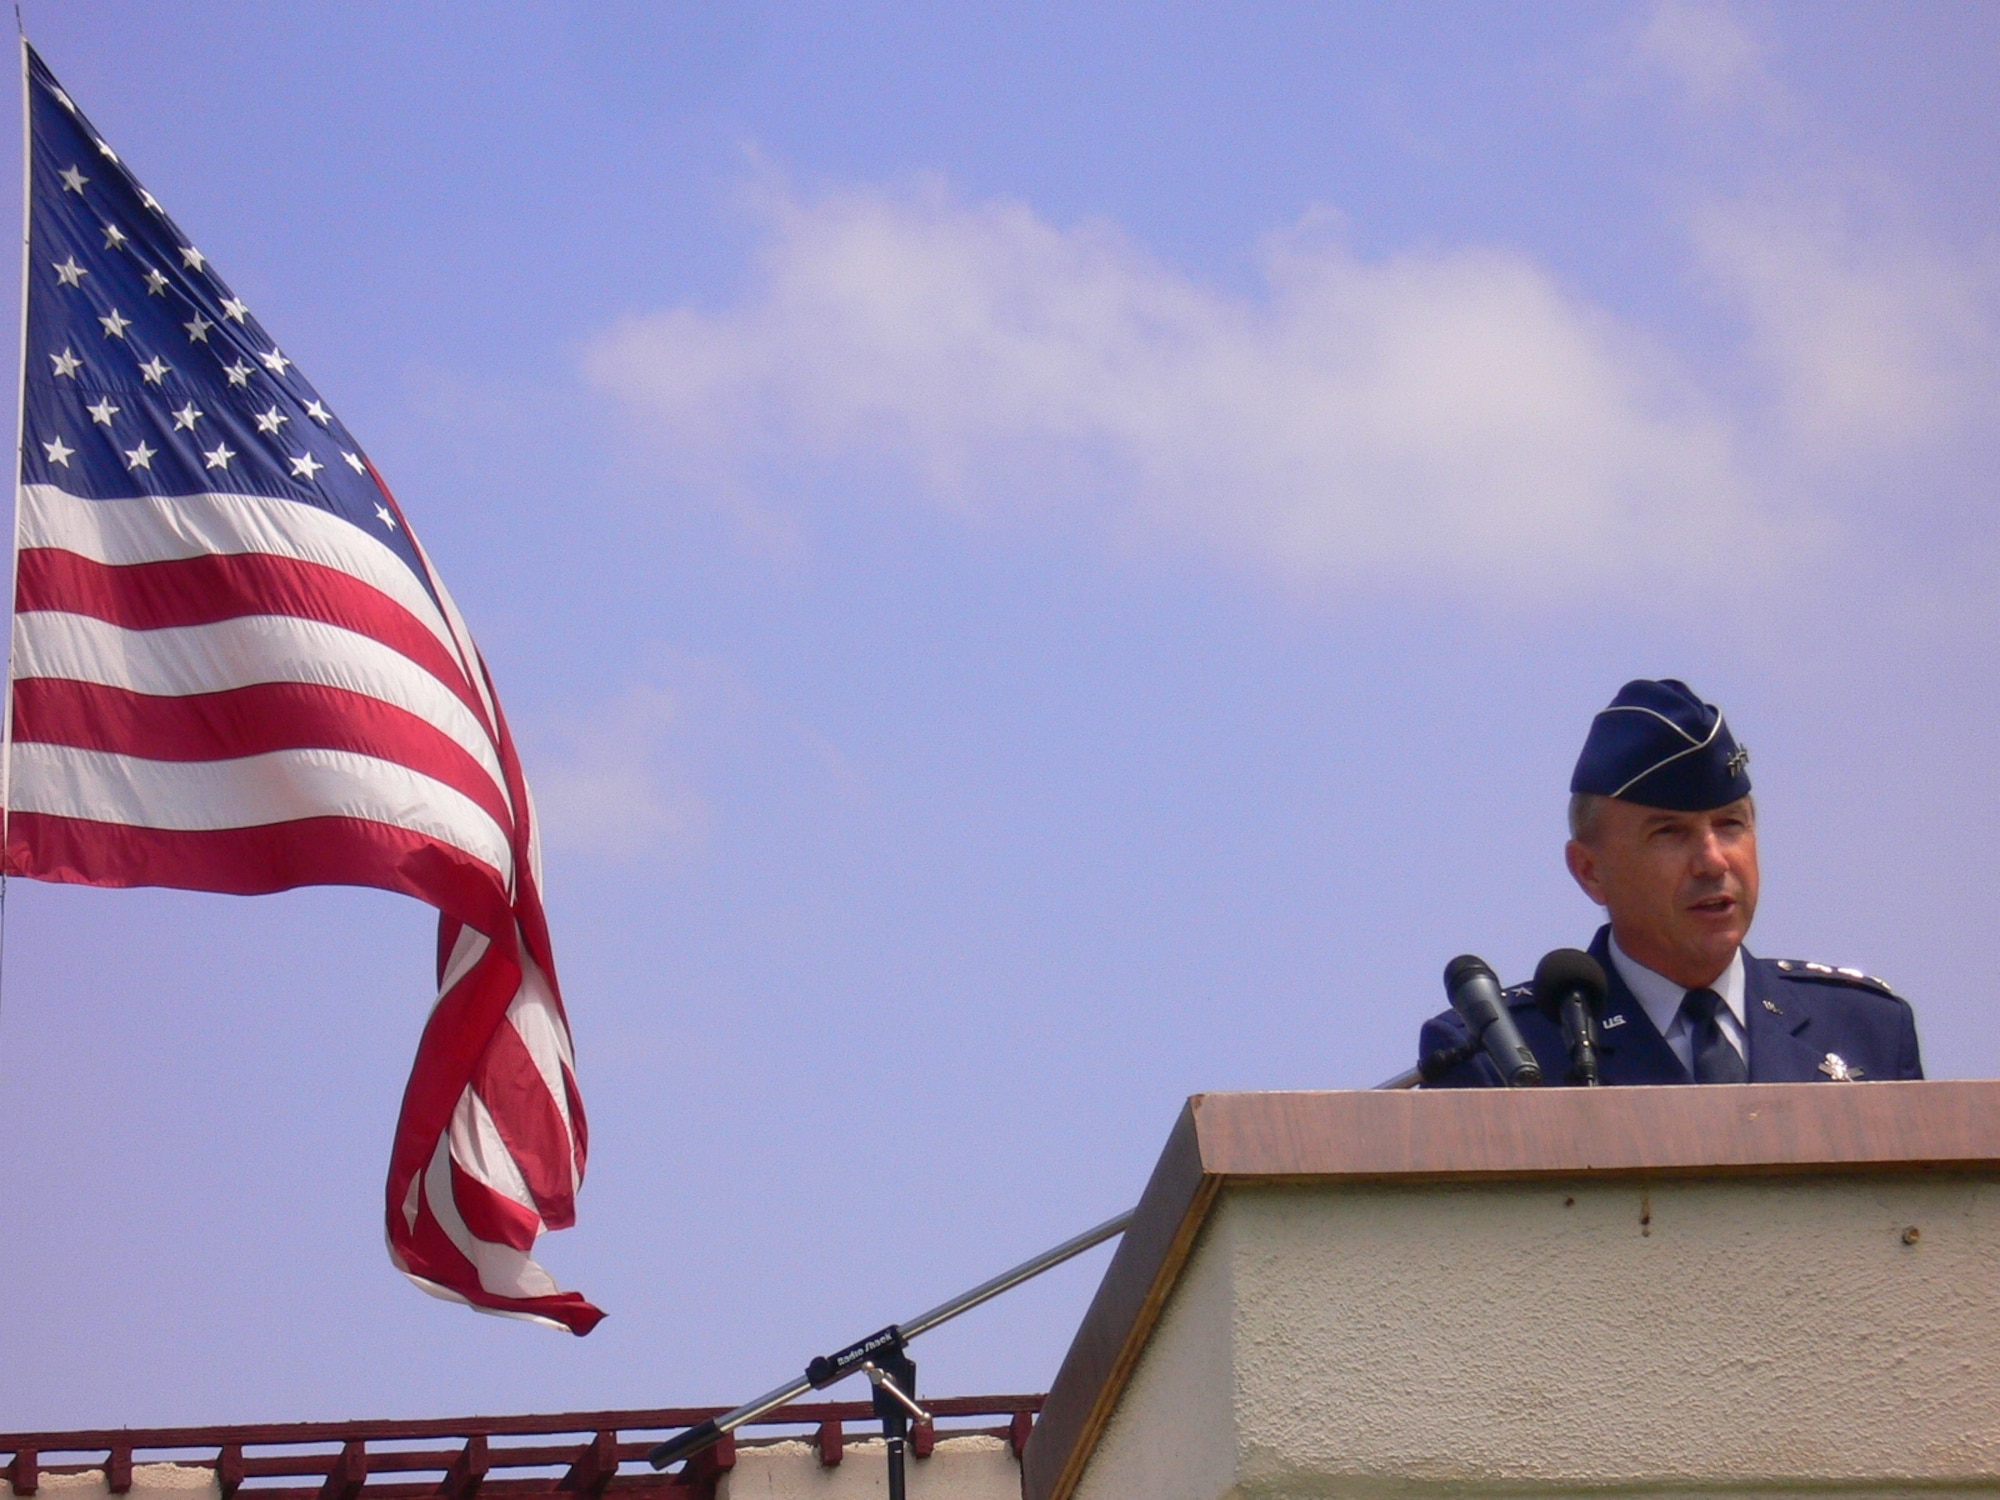 Lt. Gen. Michael Hamel, SMC Commander, was the keynote speaker at this year’s Los Angeles National Cemetery’s Memorial Day salute, May 28.